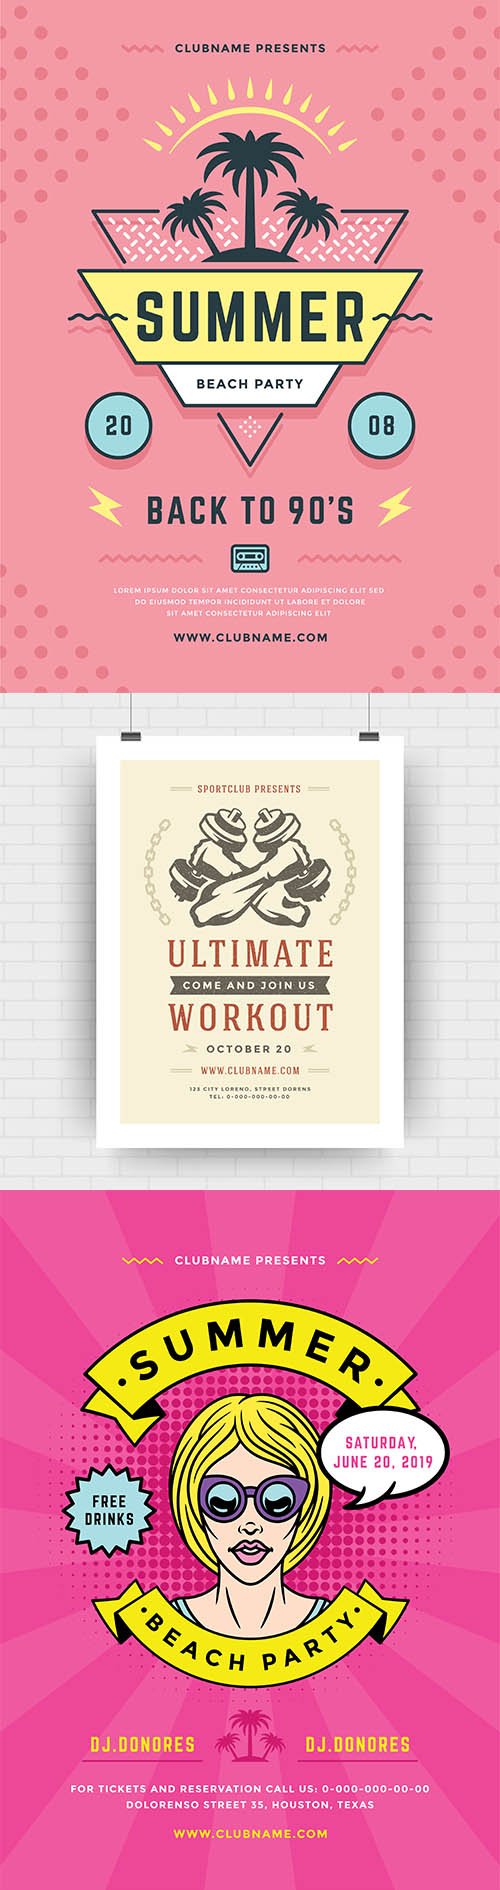 Summer Beach Party Flyer and Fitness Center Poster Template